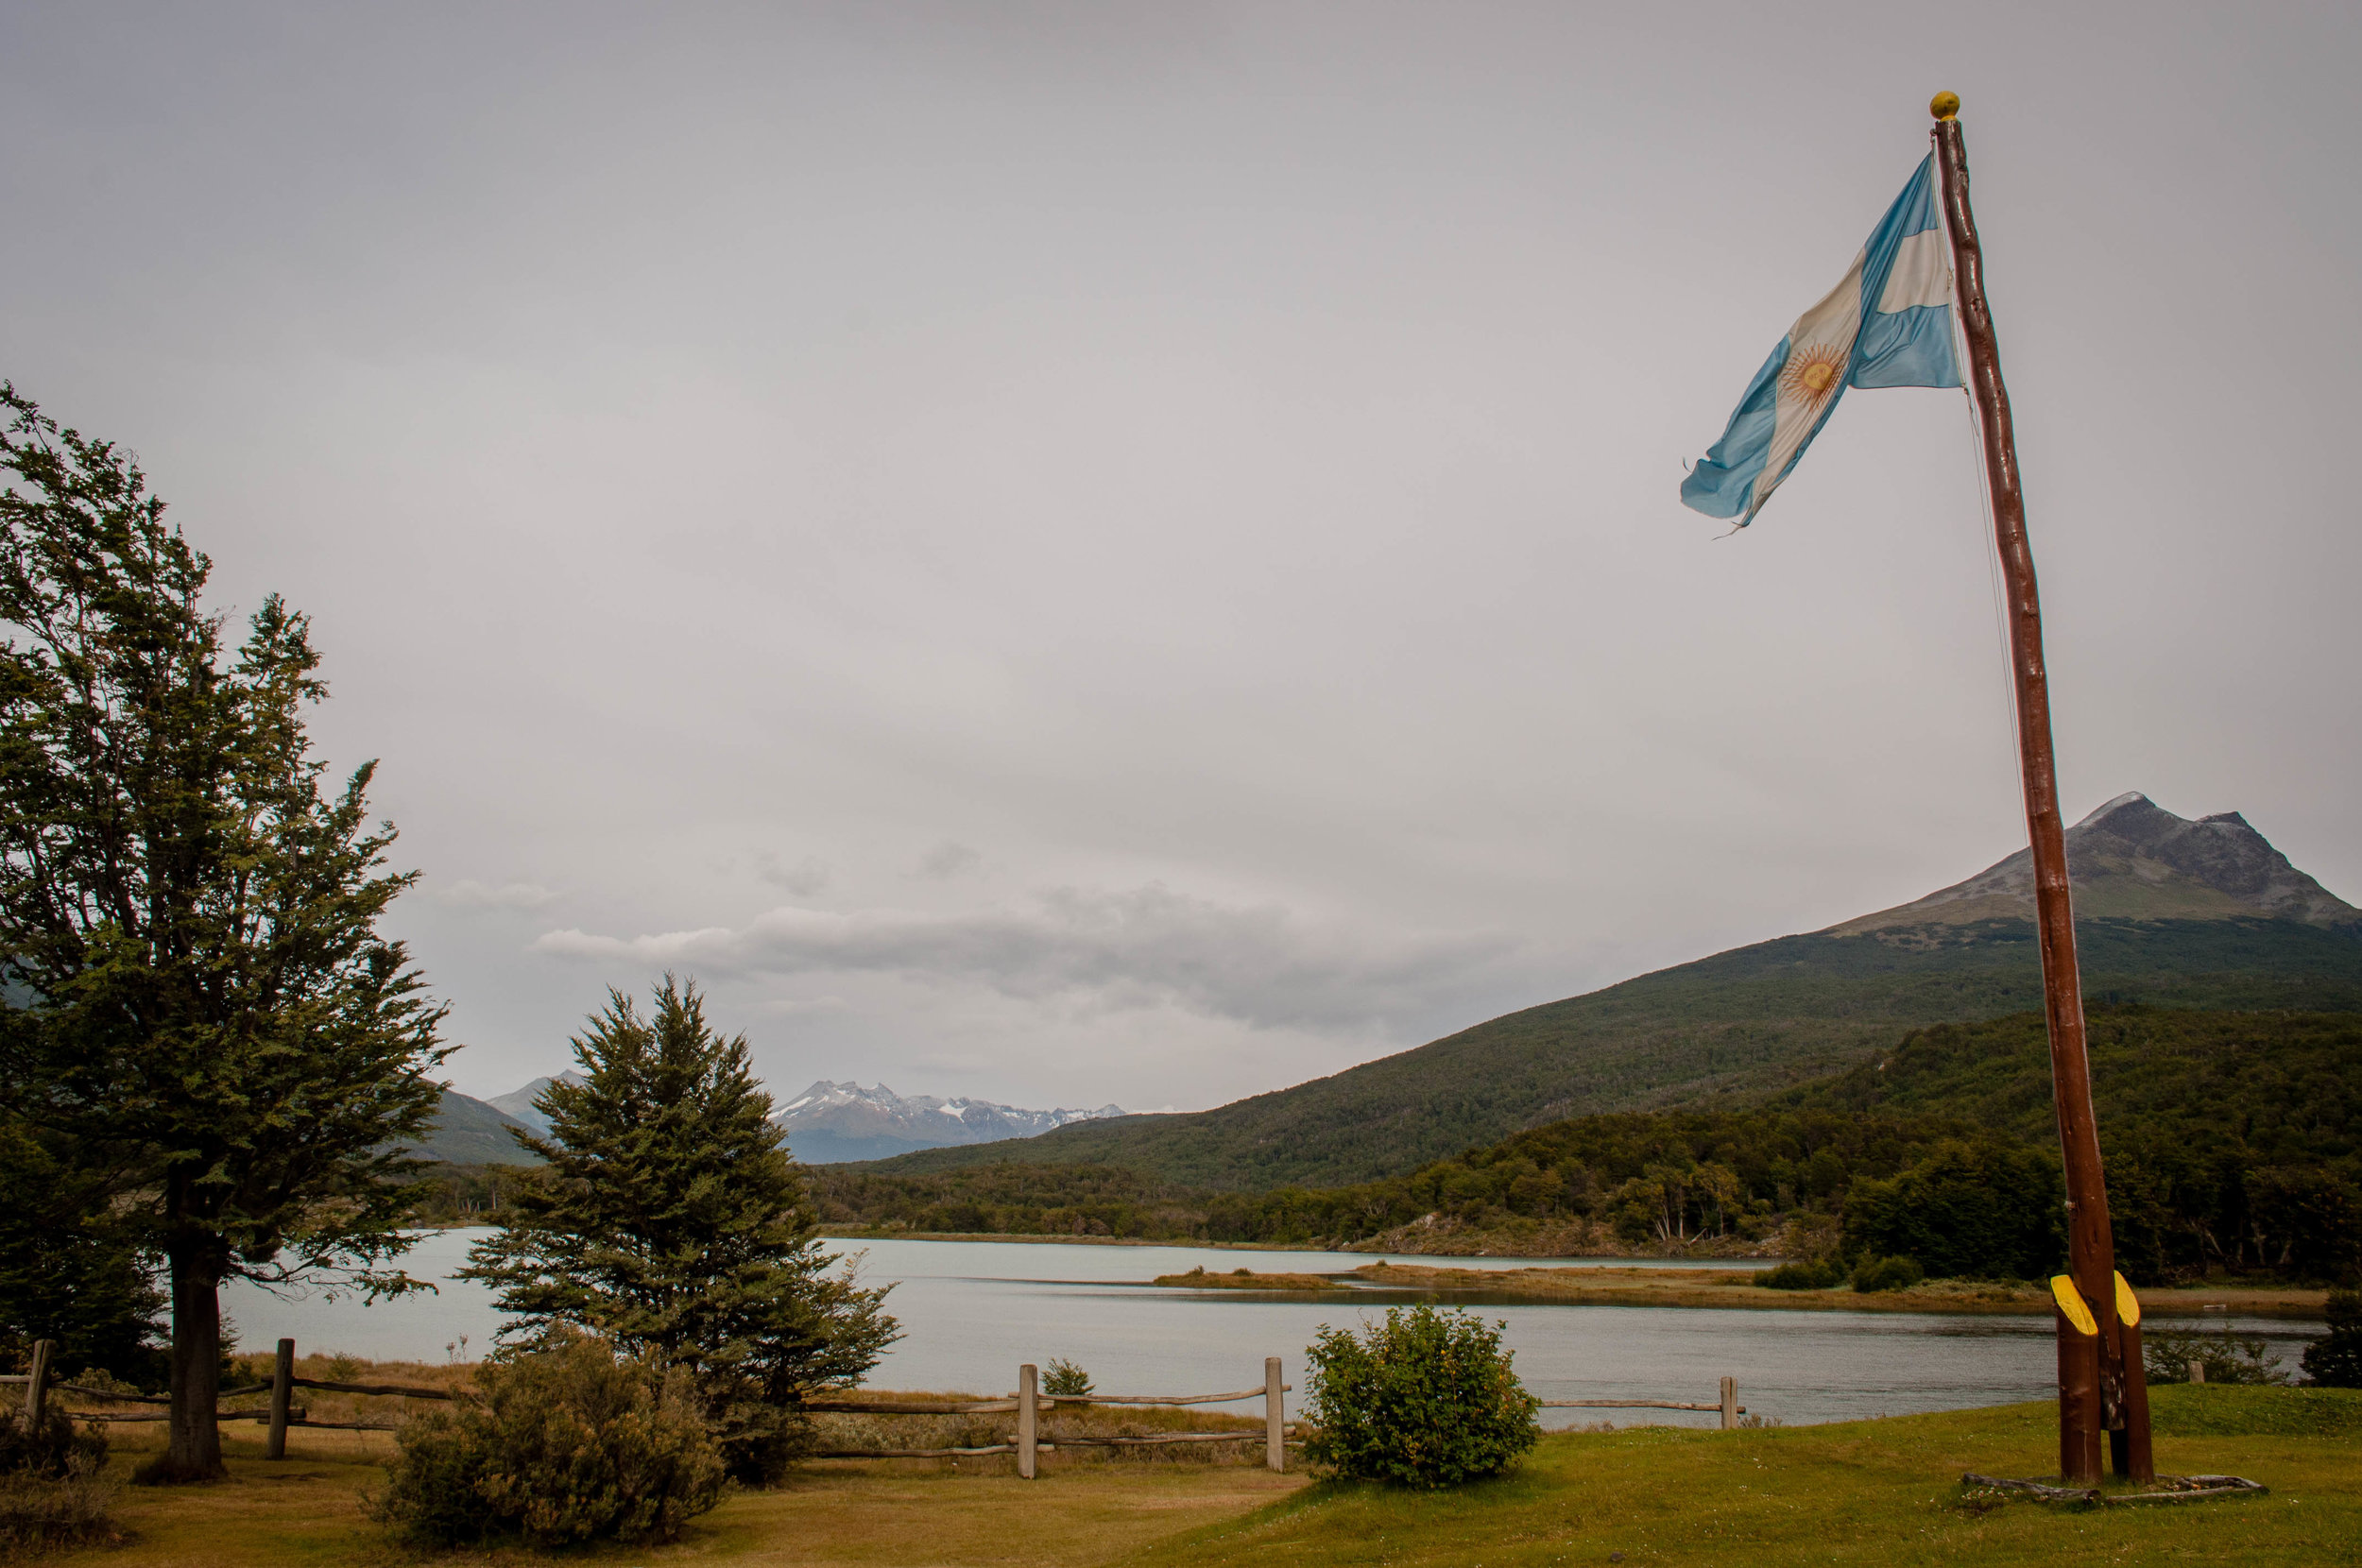 Views from the Parque Nacional Tierra del Fuego. Best things to do in Ushuaia